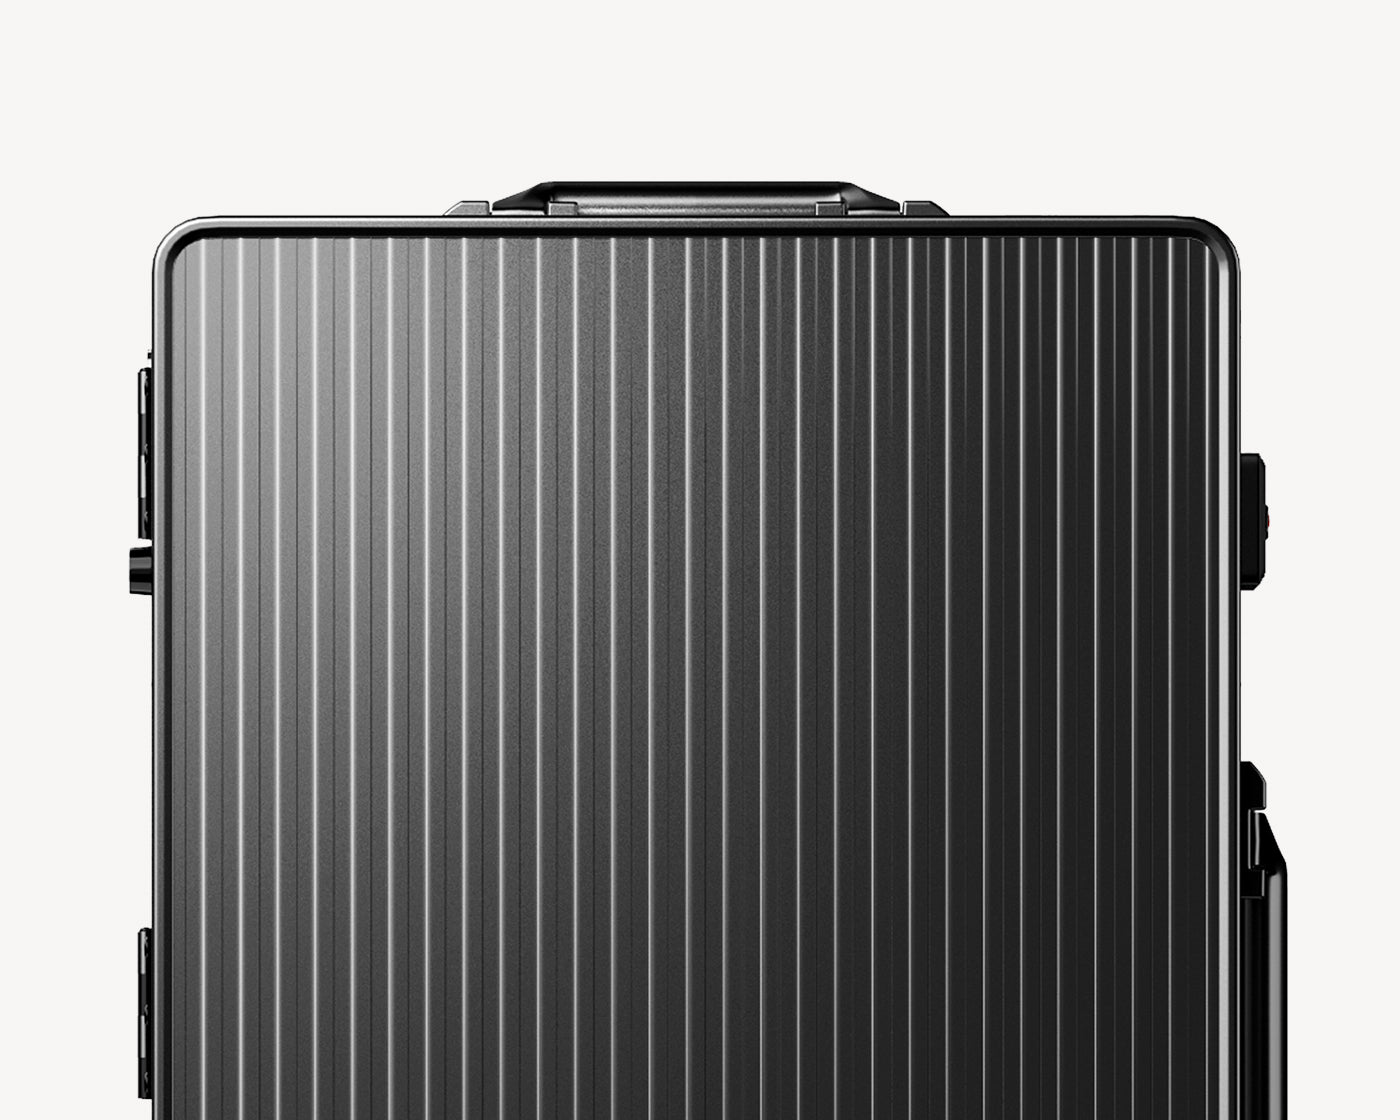 Image of a sleek, metallic-black, ribbed hard-shell aluminium luggage seen from the front, with visible side handles and a retractable top handle, against a light background.